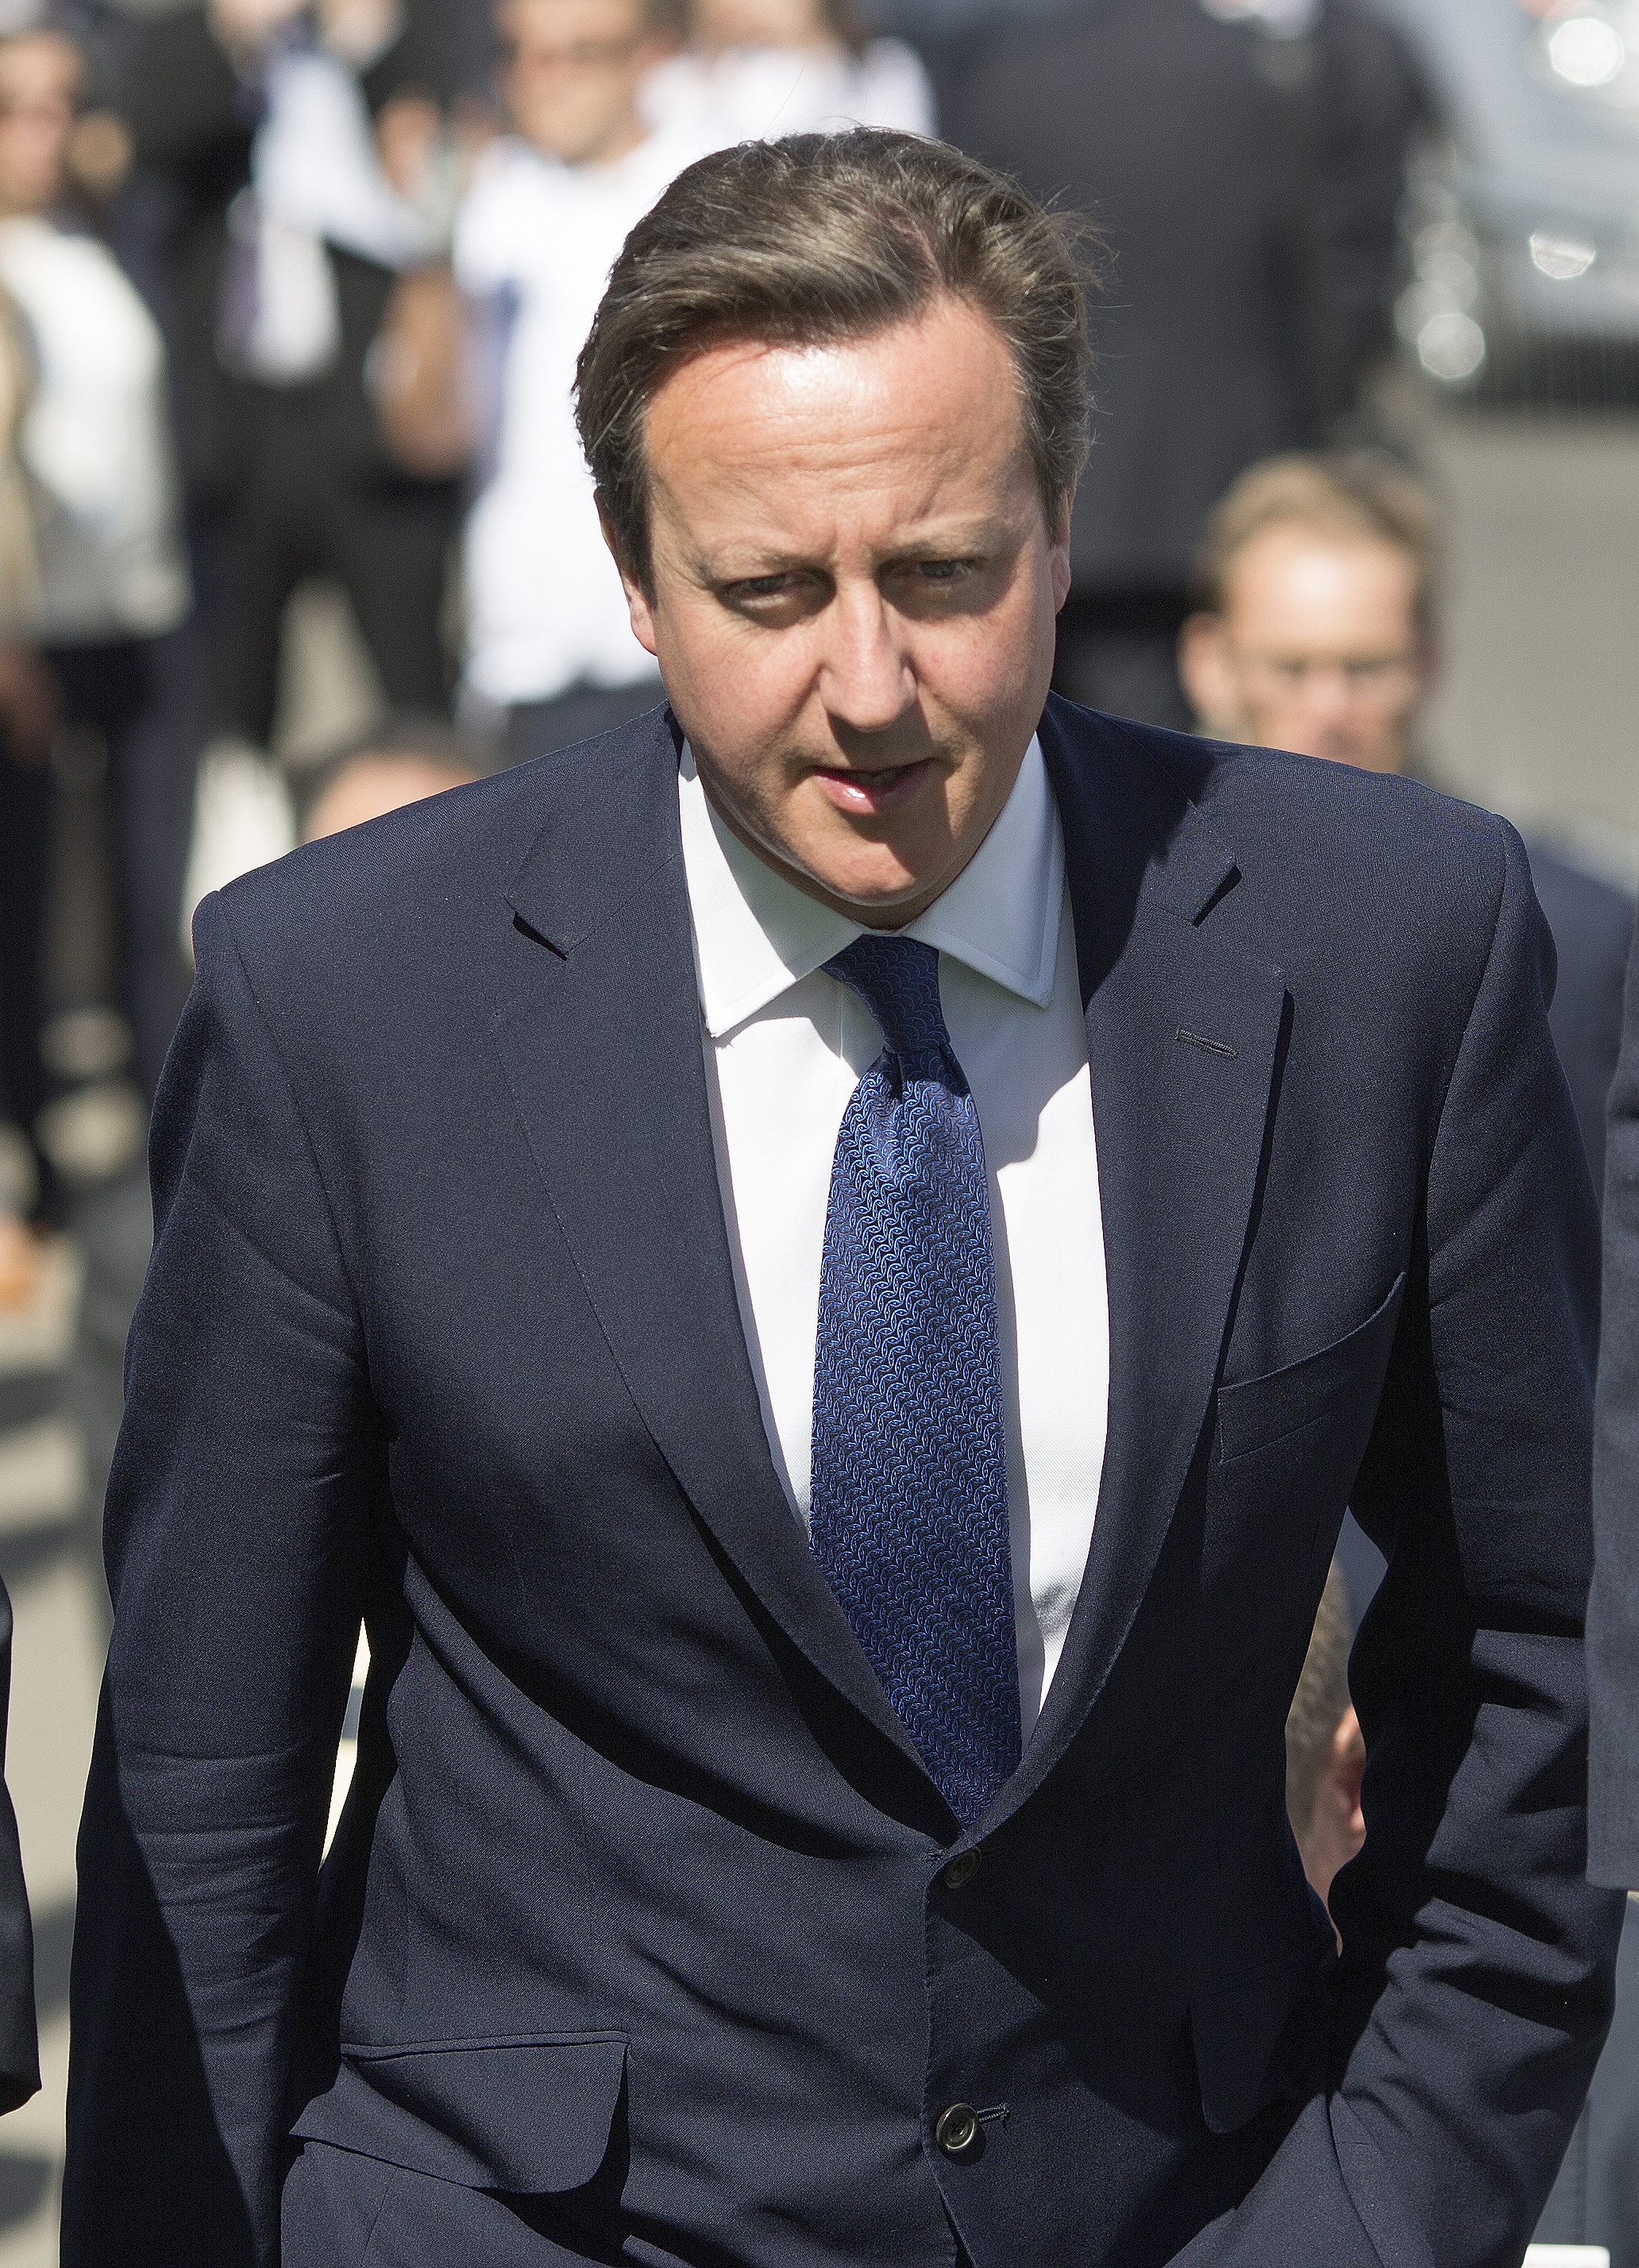 Britain's Prime Minister Cameron arrives to officially open the 2014 Farnborough International Airshow in Farnborough